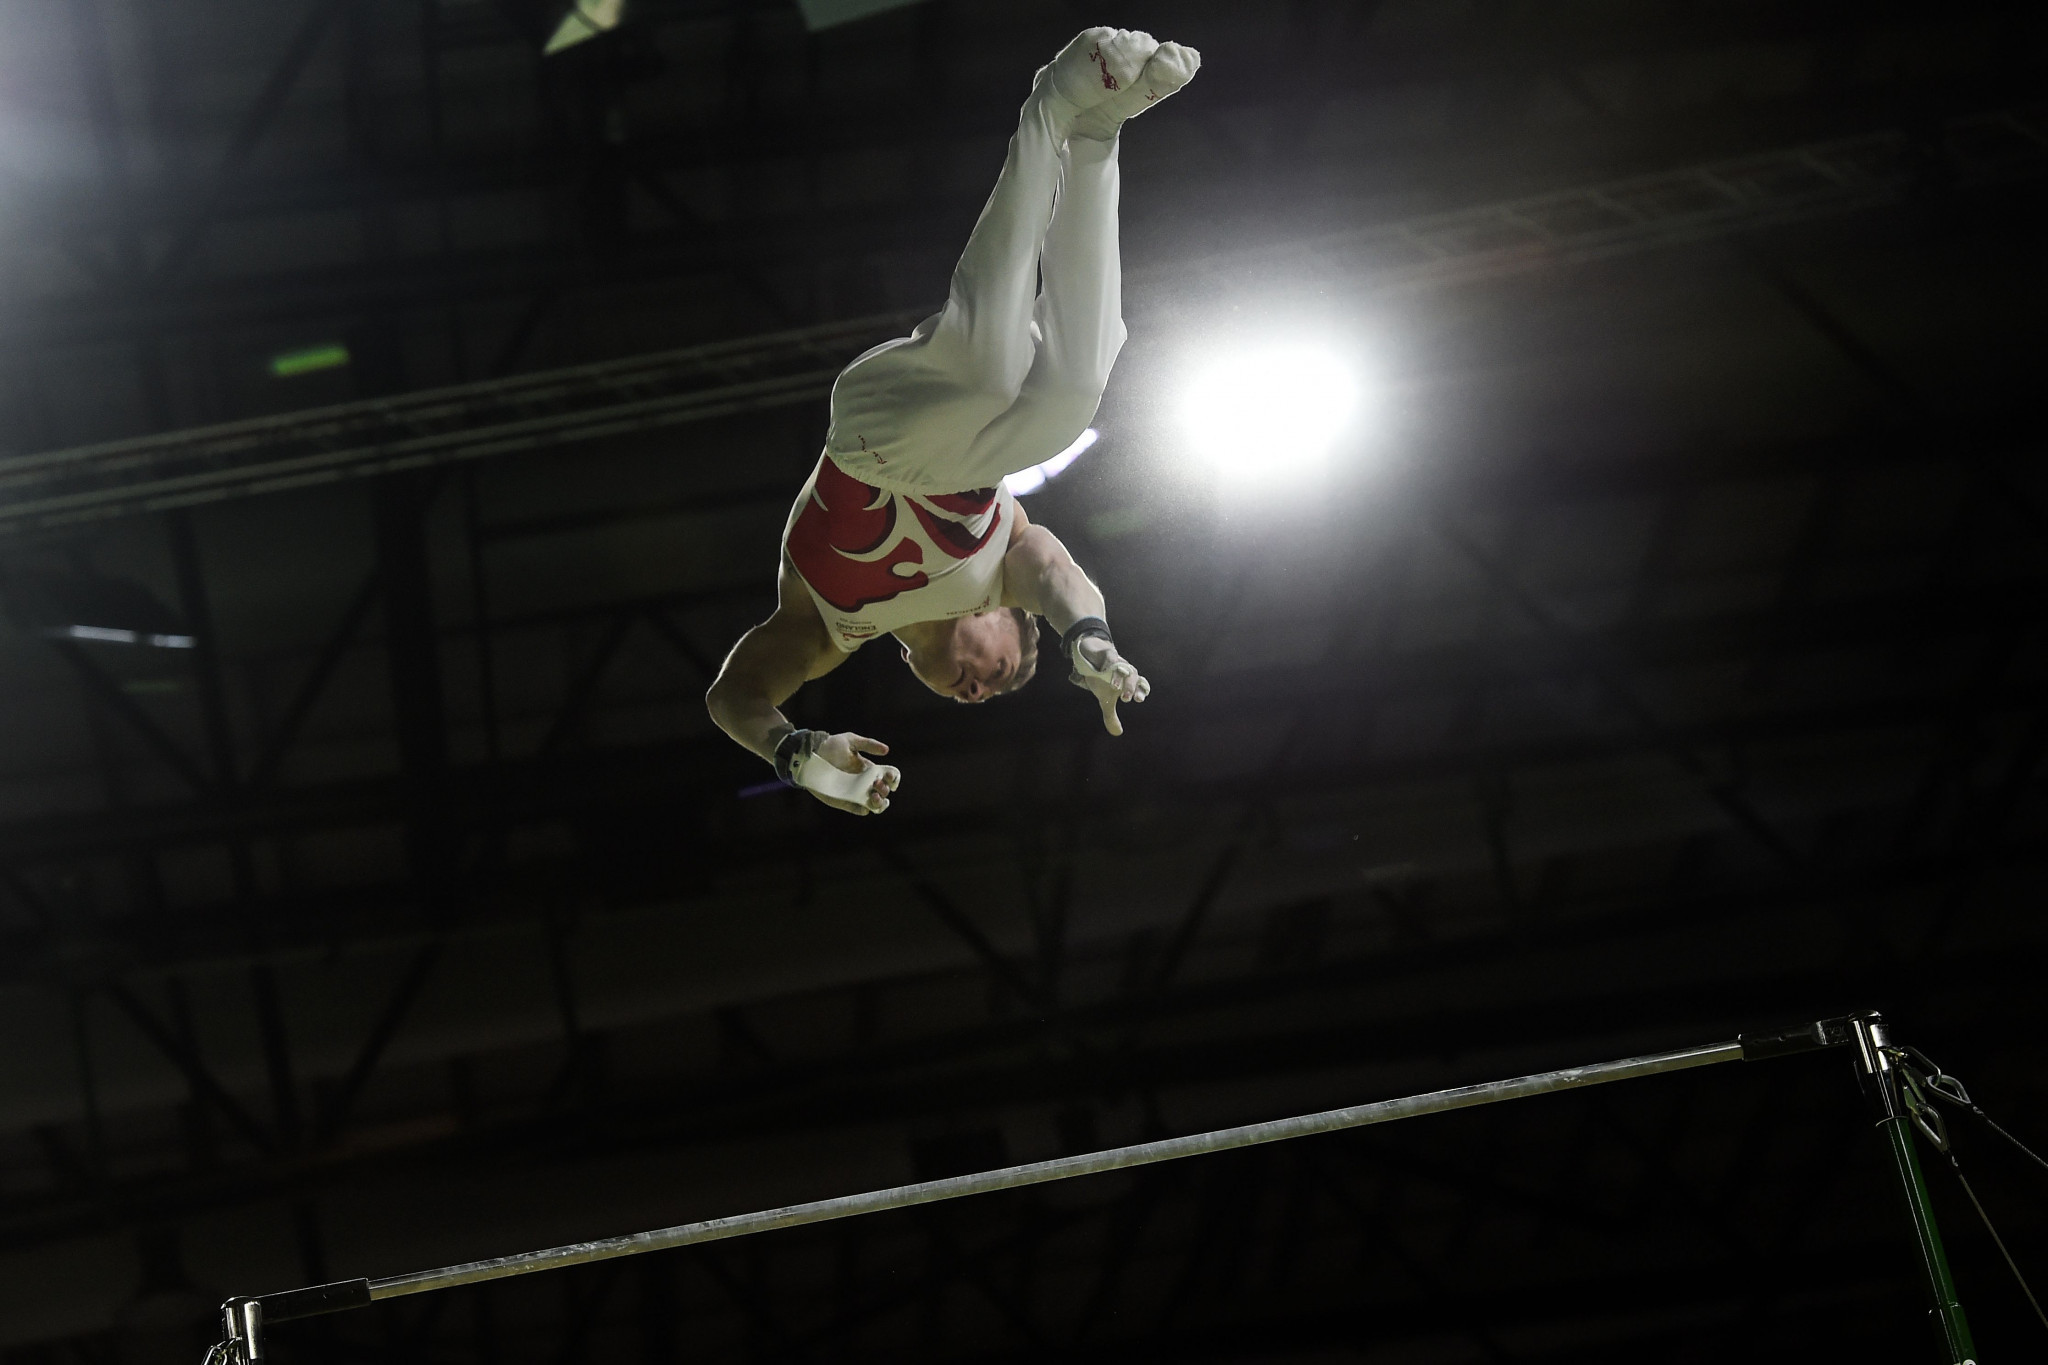 Nile Wilson claimed his third gold medal with victory in the men's horizontal bar event ©Getty Images